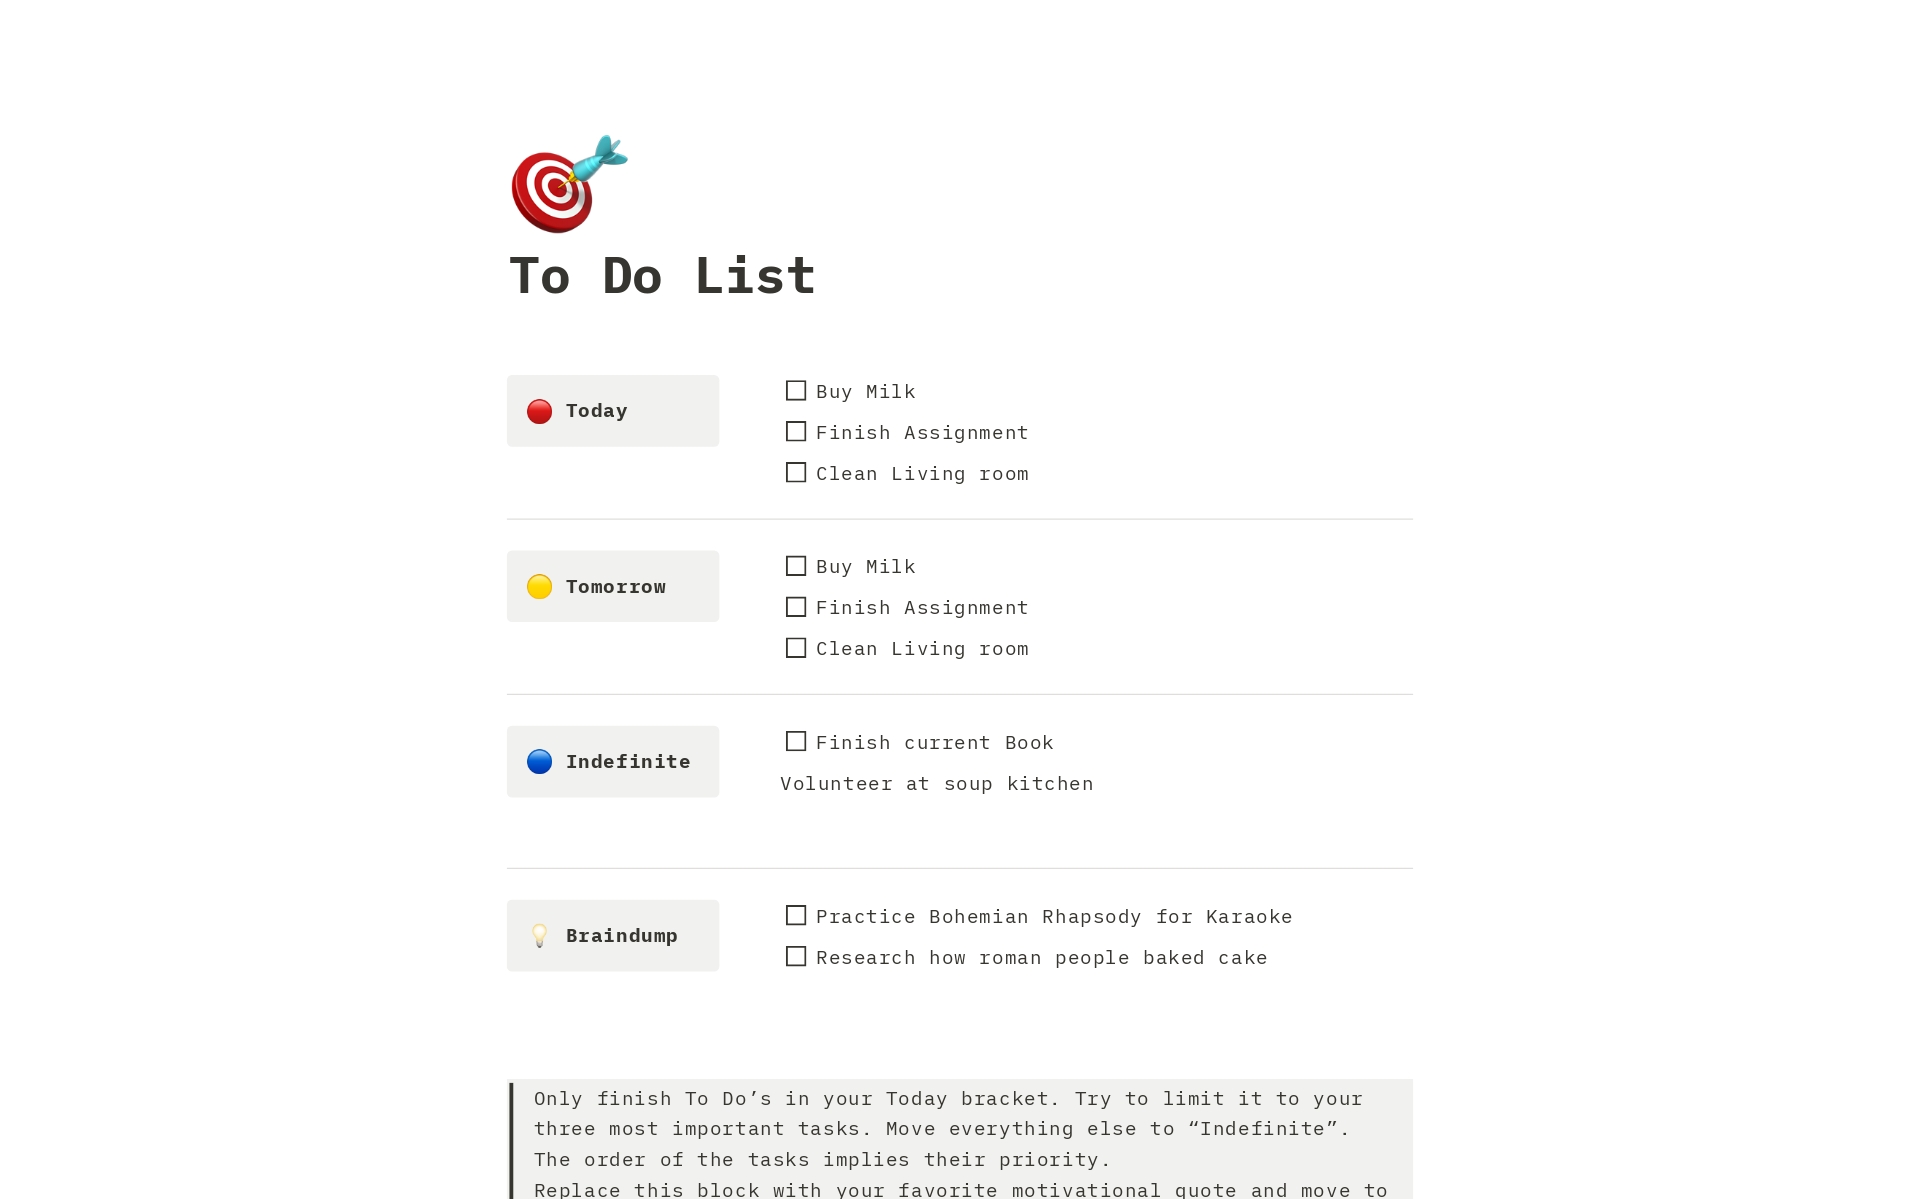 A minimal and highly effective To-Do list with embedded instruction. No unnecessary add-ons